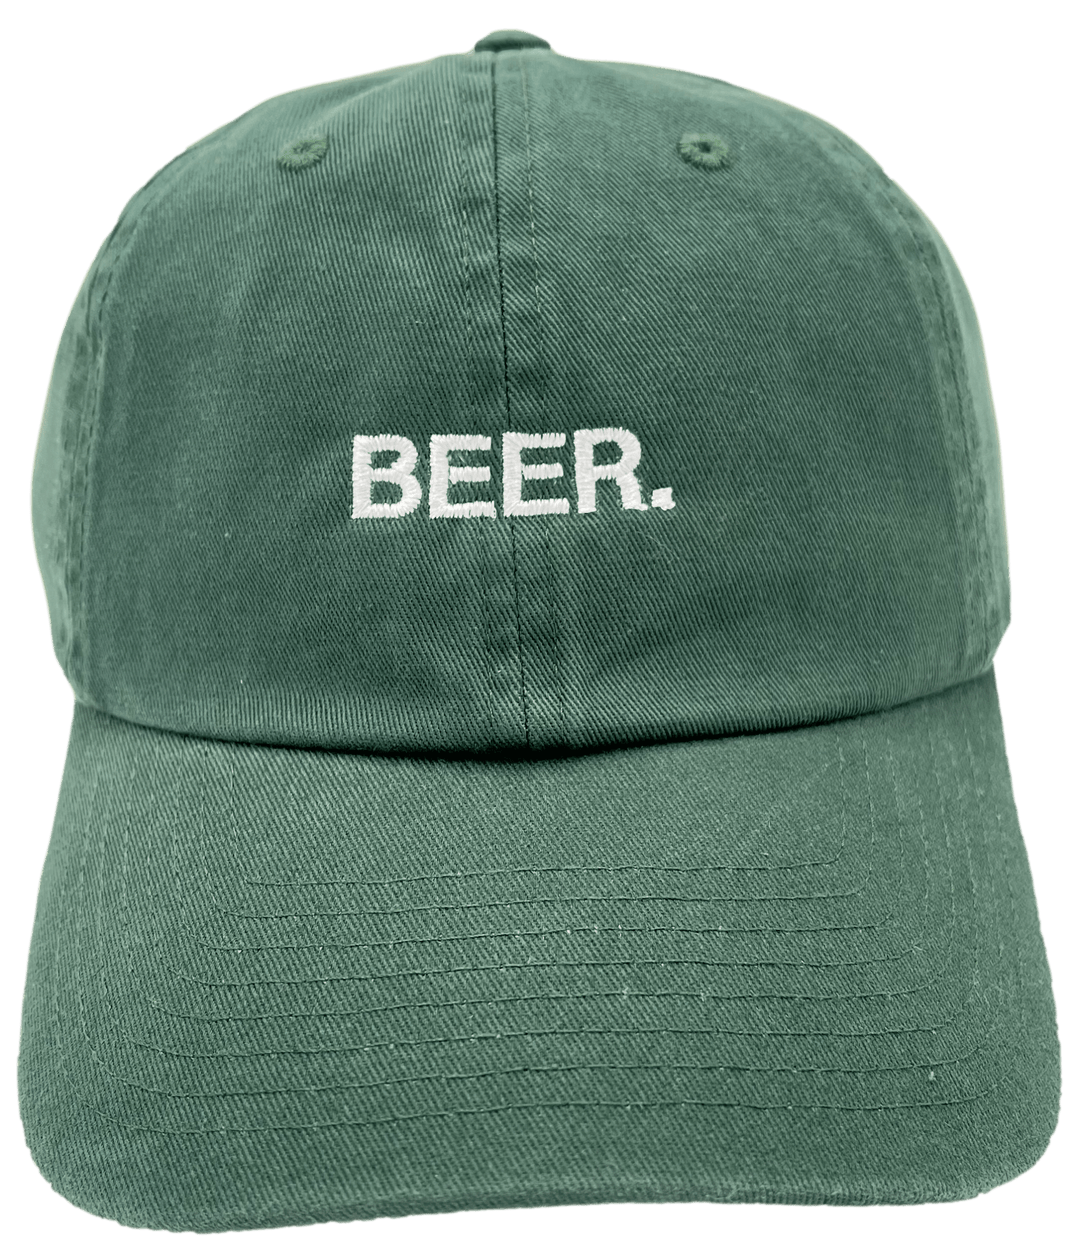 GREEN BEER DAD HAT. - OBVIOUS SHIRTS